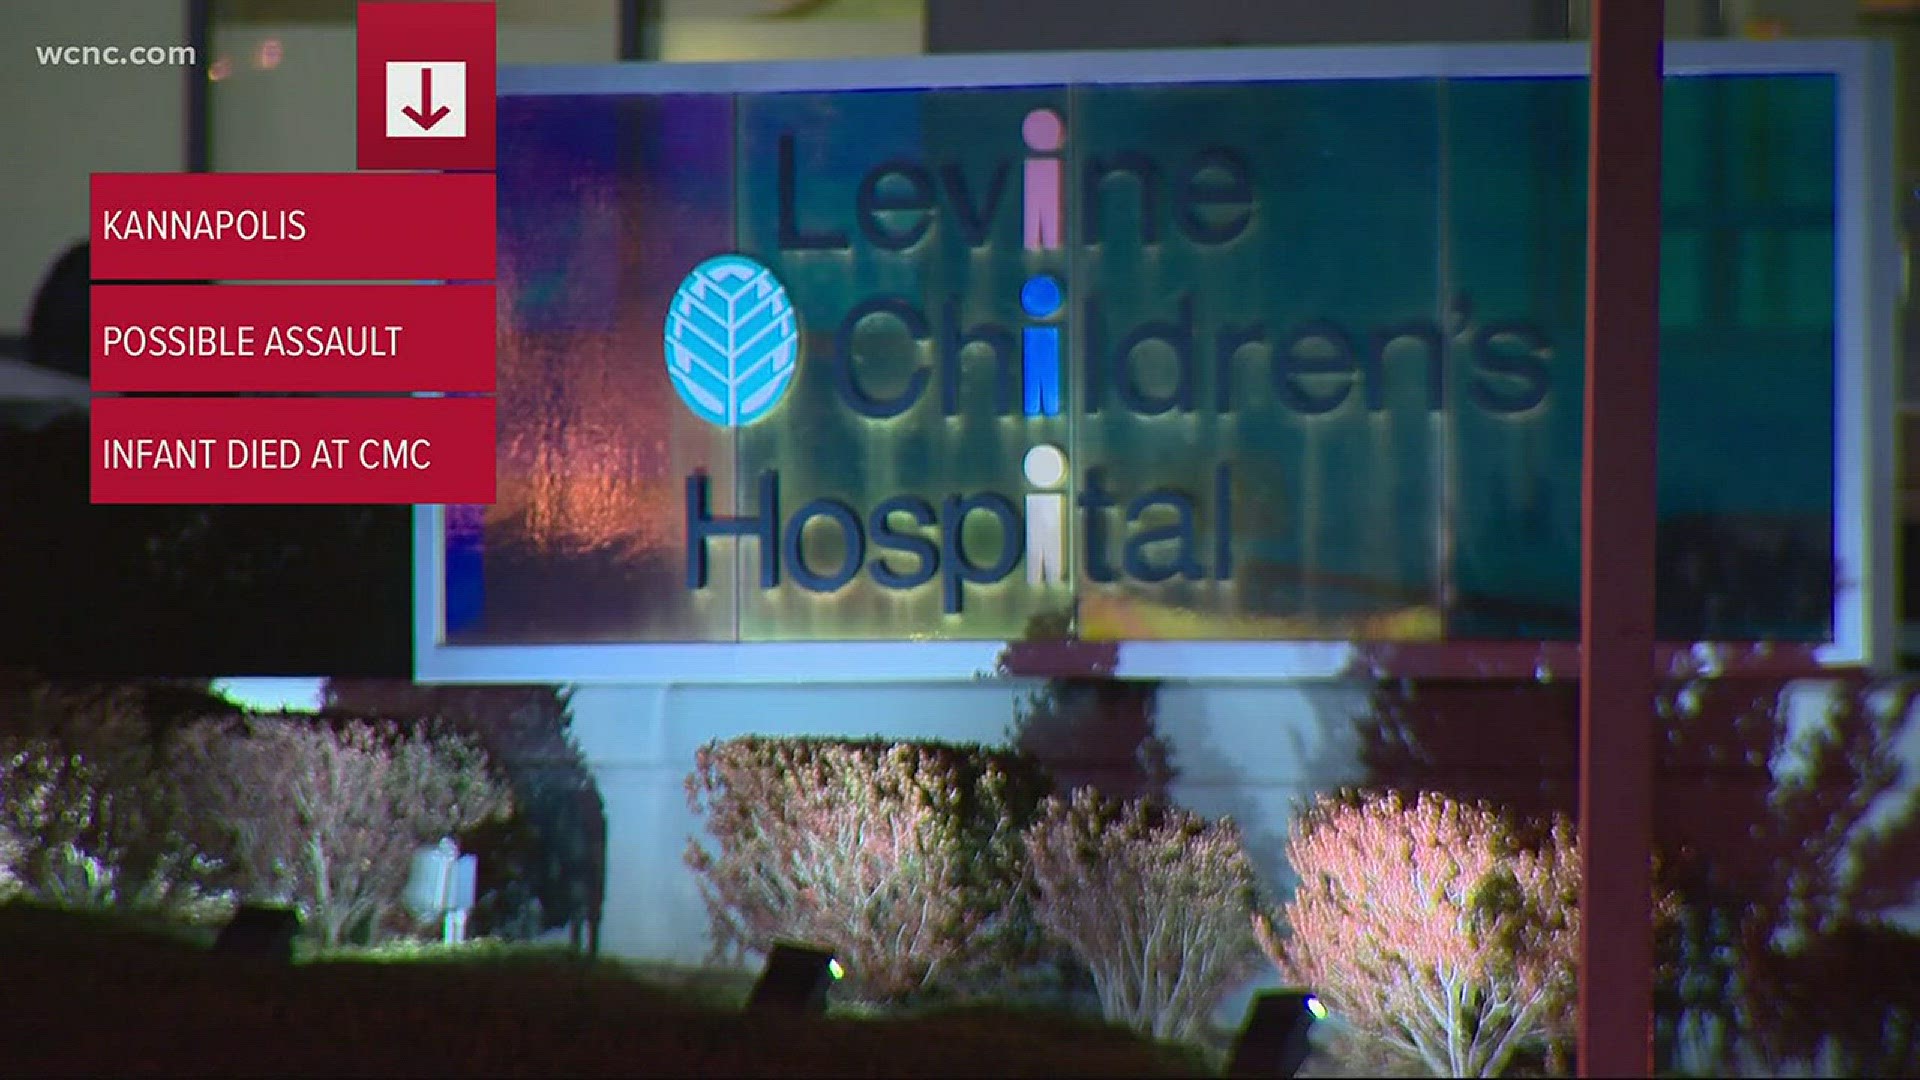 Kannapolis Police are investigating the death of an infant.